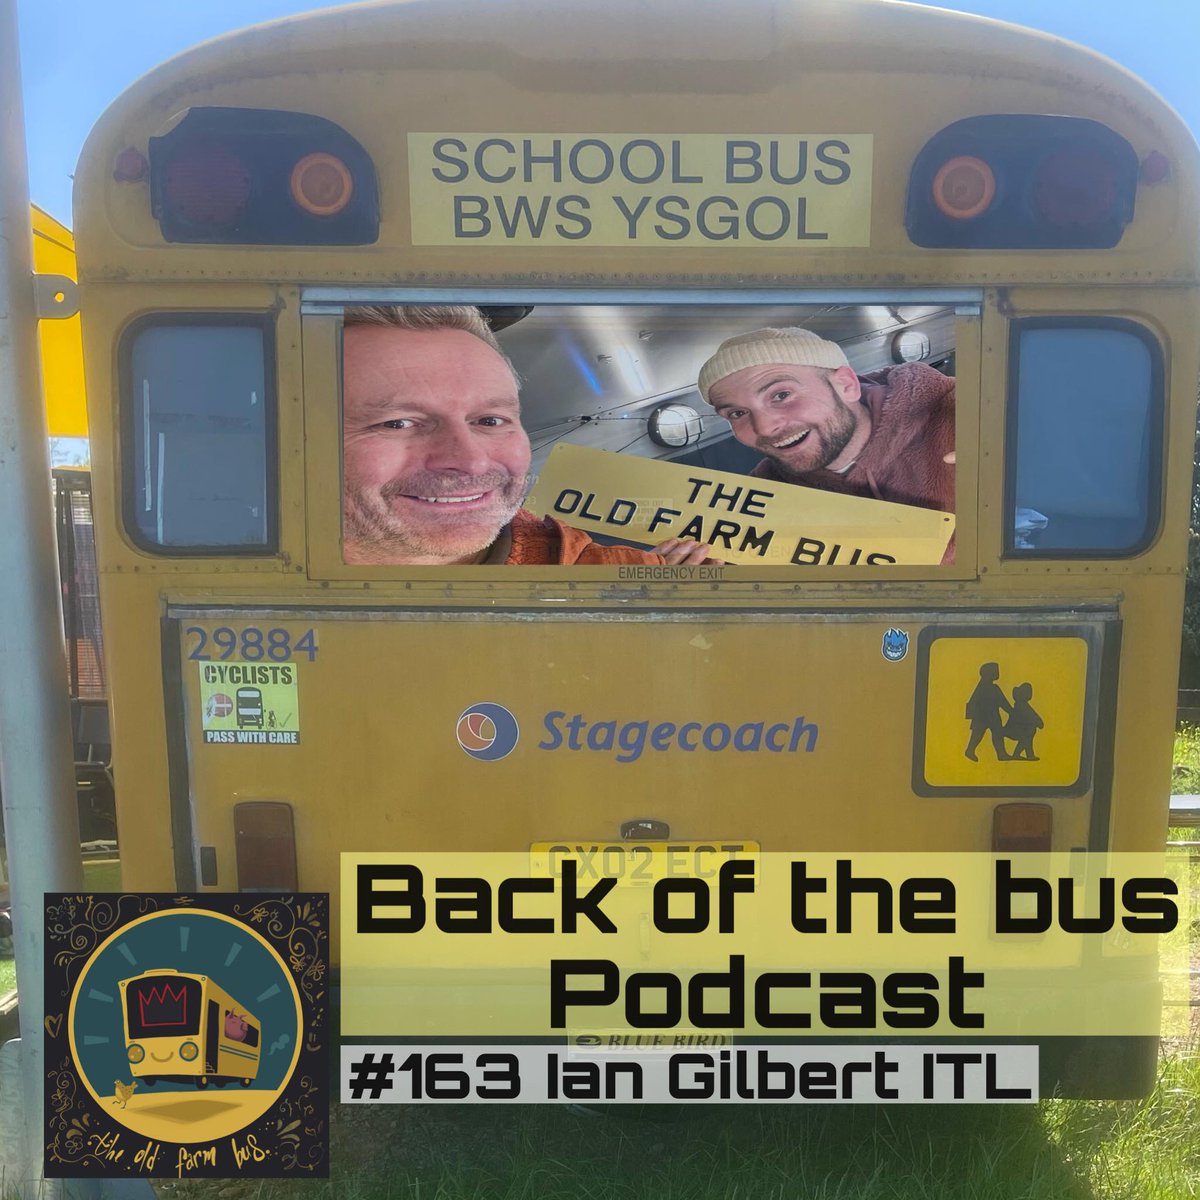 The Back of the bus sessions podcast | Ian Gilbert @ITLWorldwide (happy 30th birthday) Since founding Independent Thinking in 1994, Ian has built a global reputation as an educational thinker, innovator, entrepreneur, speaker and award-winning editor and writer. @TheOldFarmBus1